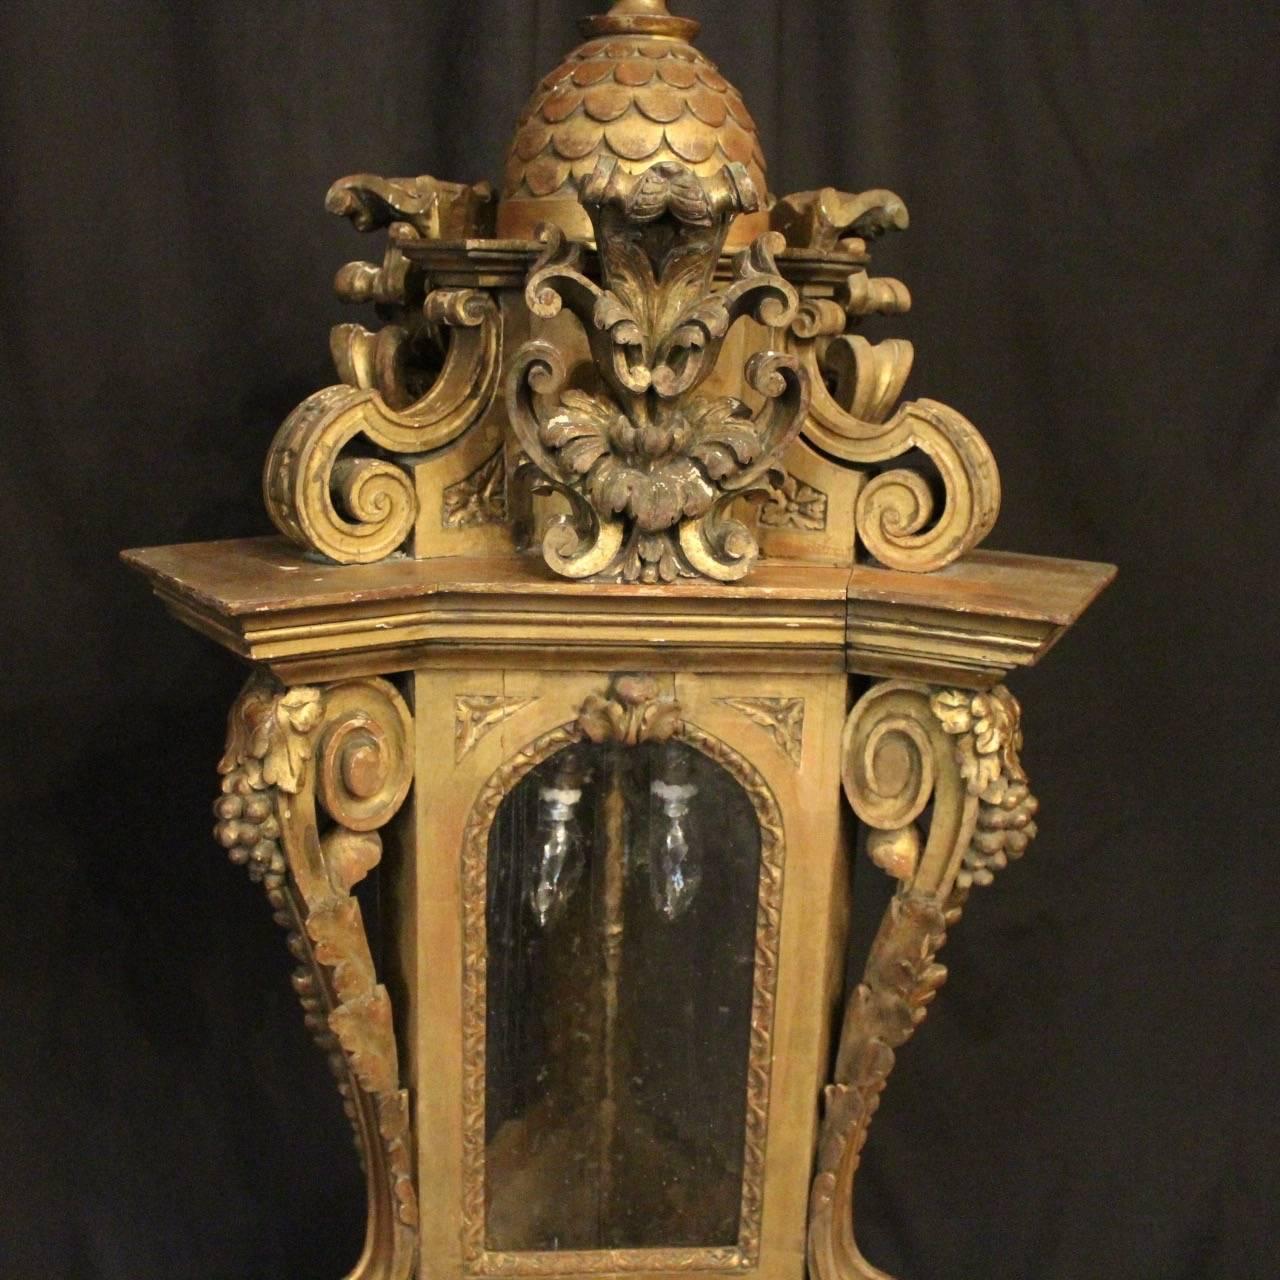 A large Italian carved giltwood triple light antique hall lantern, the mottled shaped glass panels held within an ornate scrolling framework with three internal light fittings and having decorative scrolled central cartouche embellishments, sitting